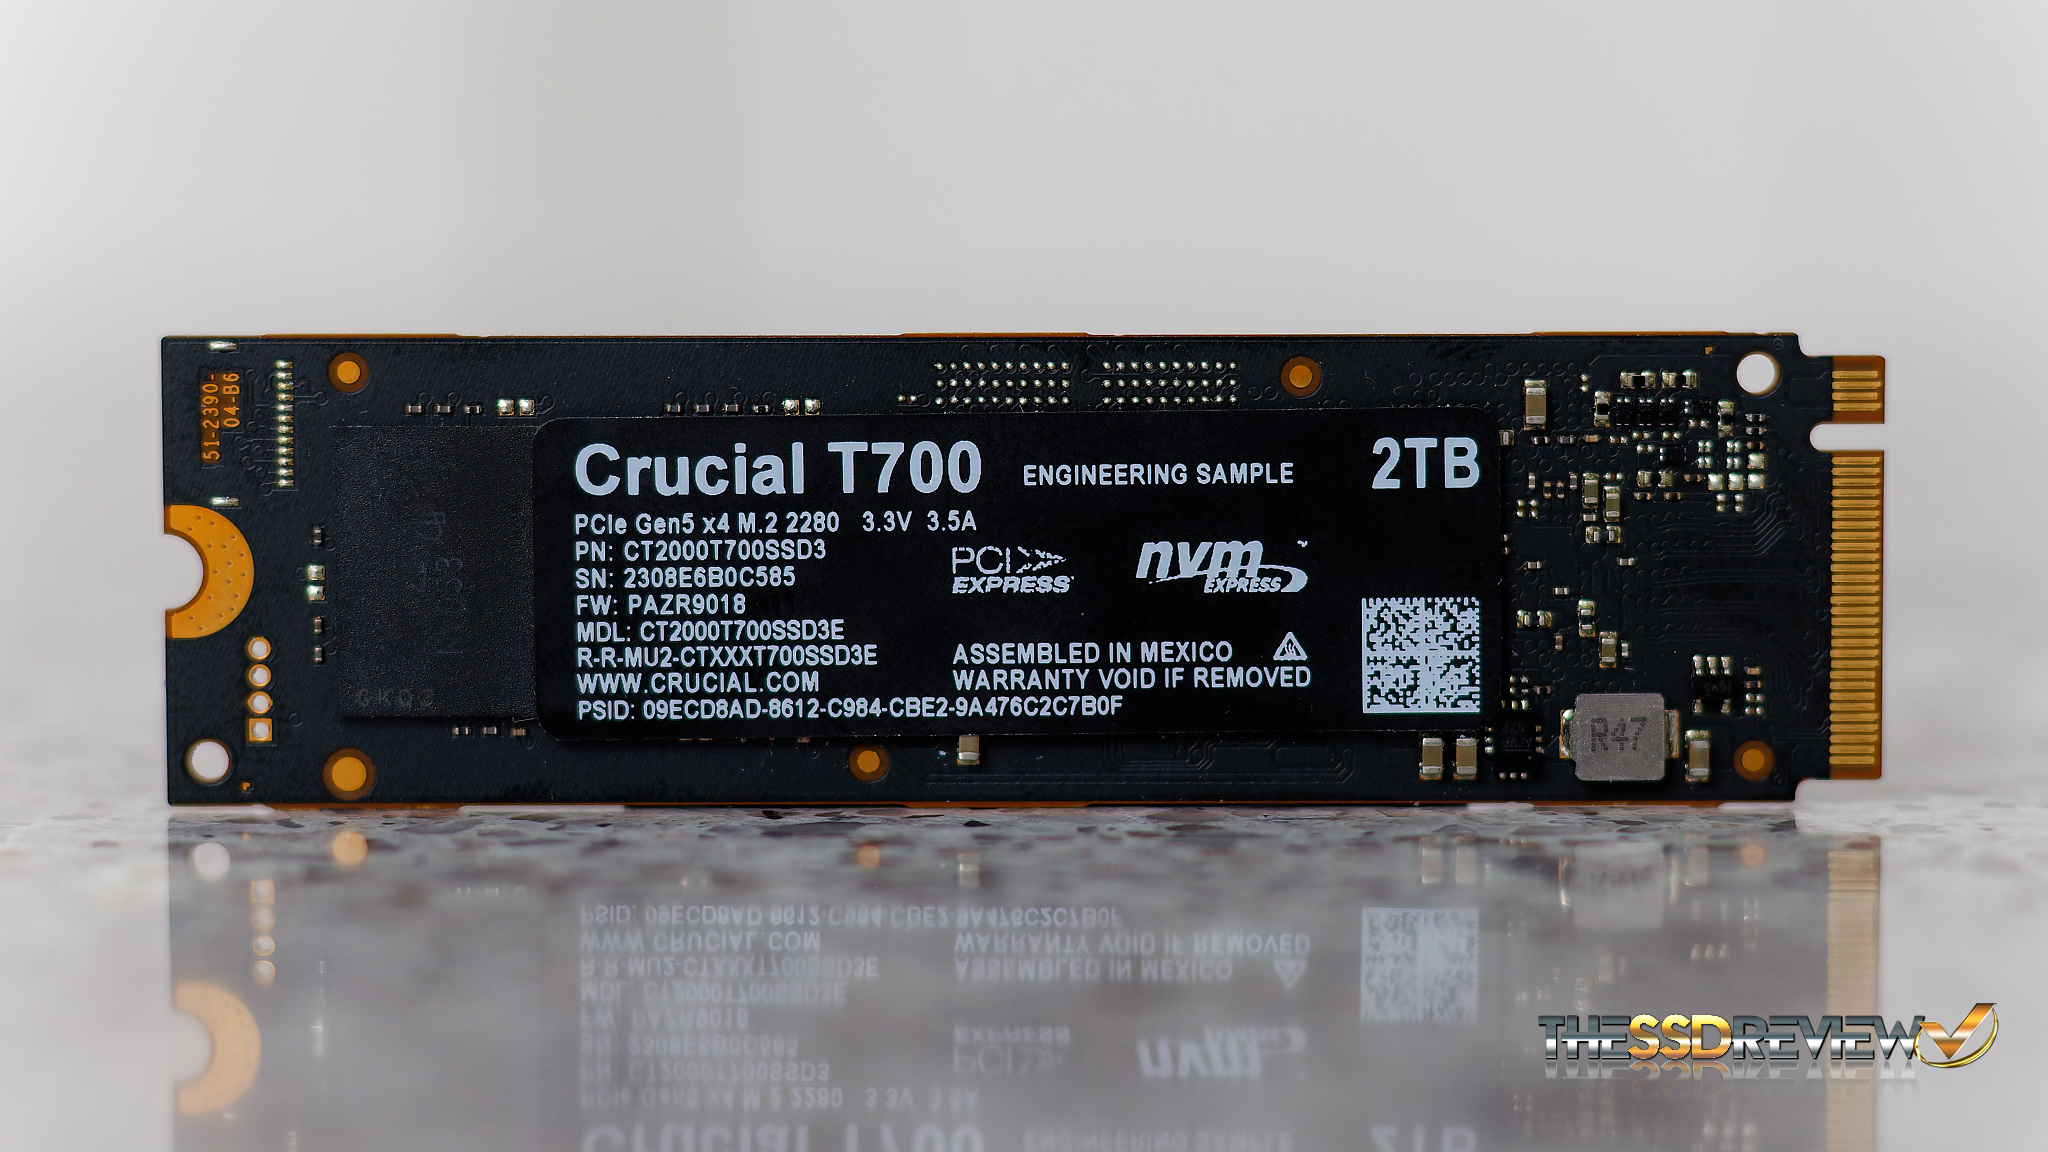 Crucial T700 Review - Performance, Gaming, Thermals 